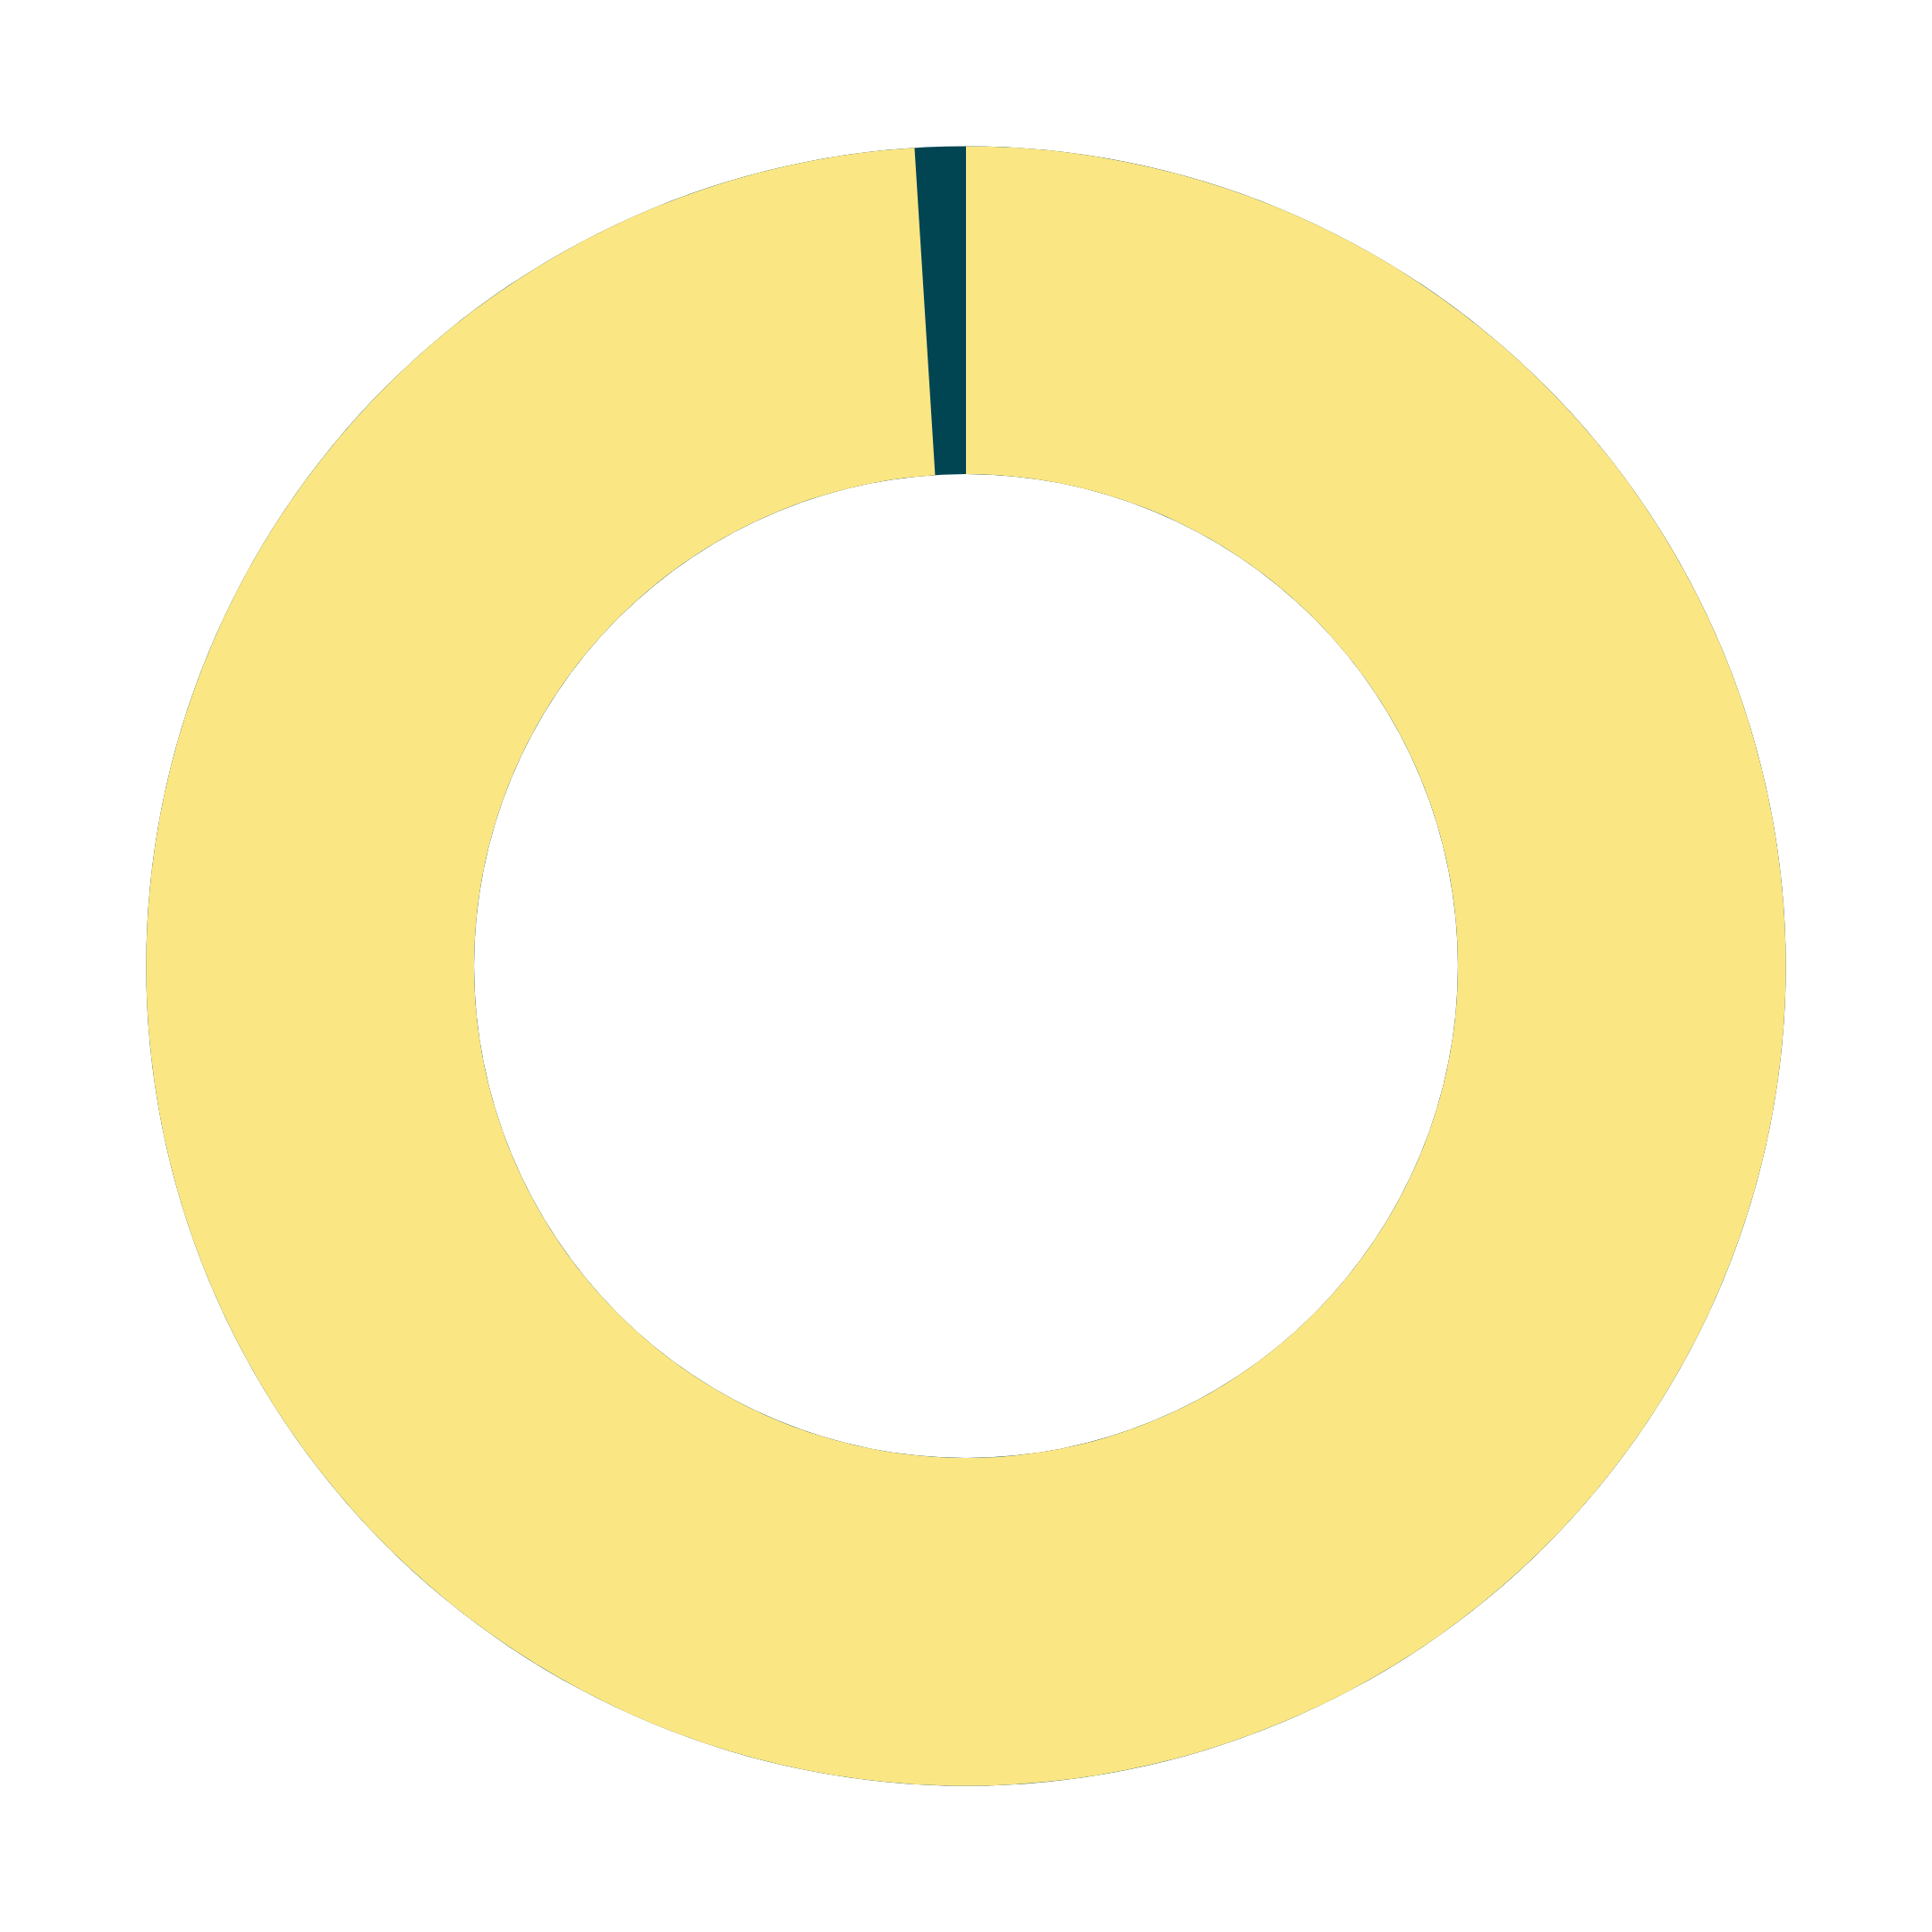 Circle graph with 99% filled